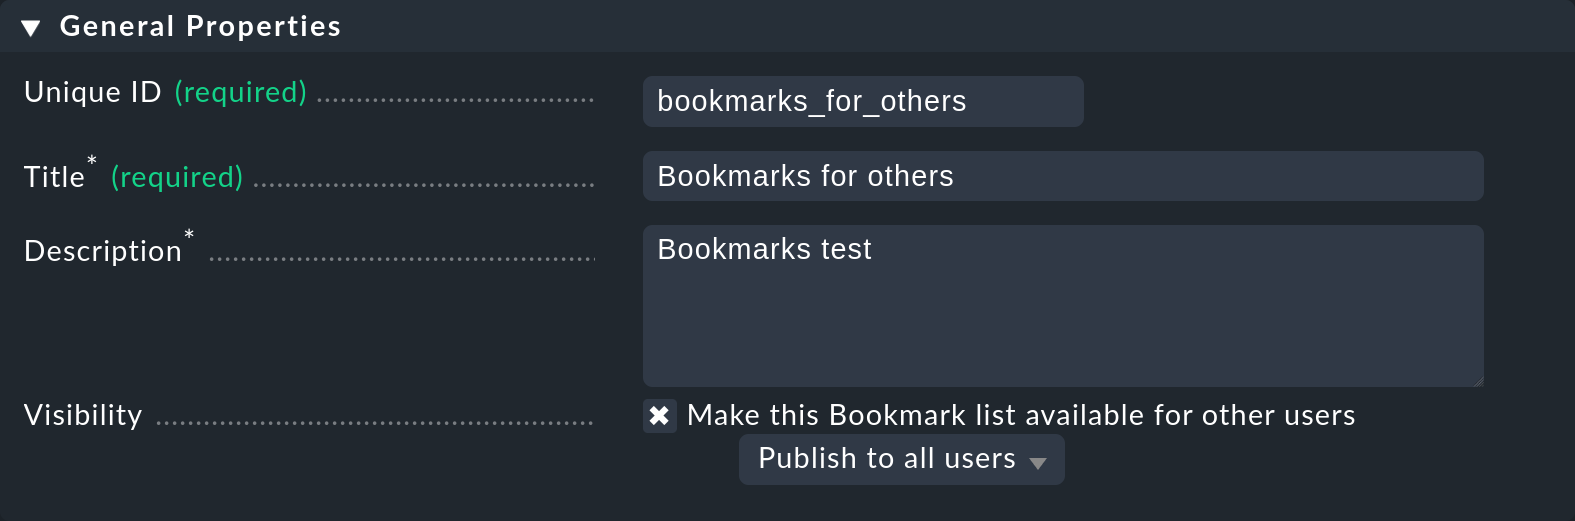 Dialogue with properties when creating a bookmark list.